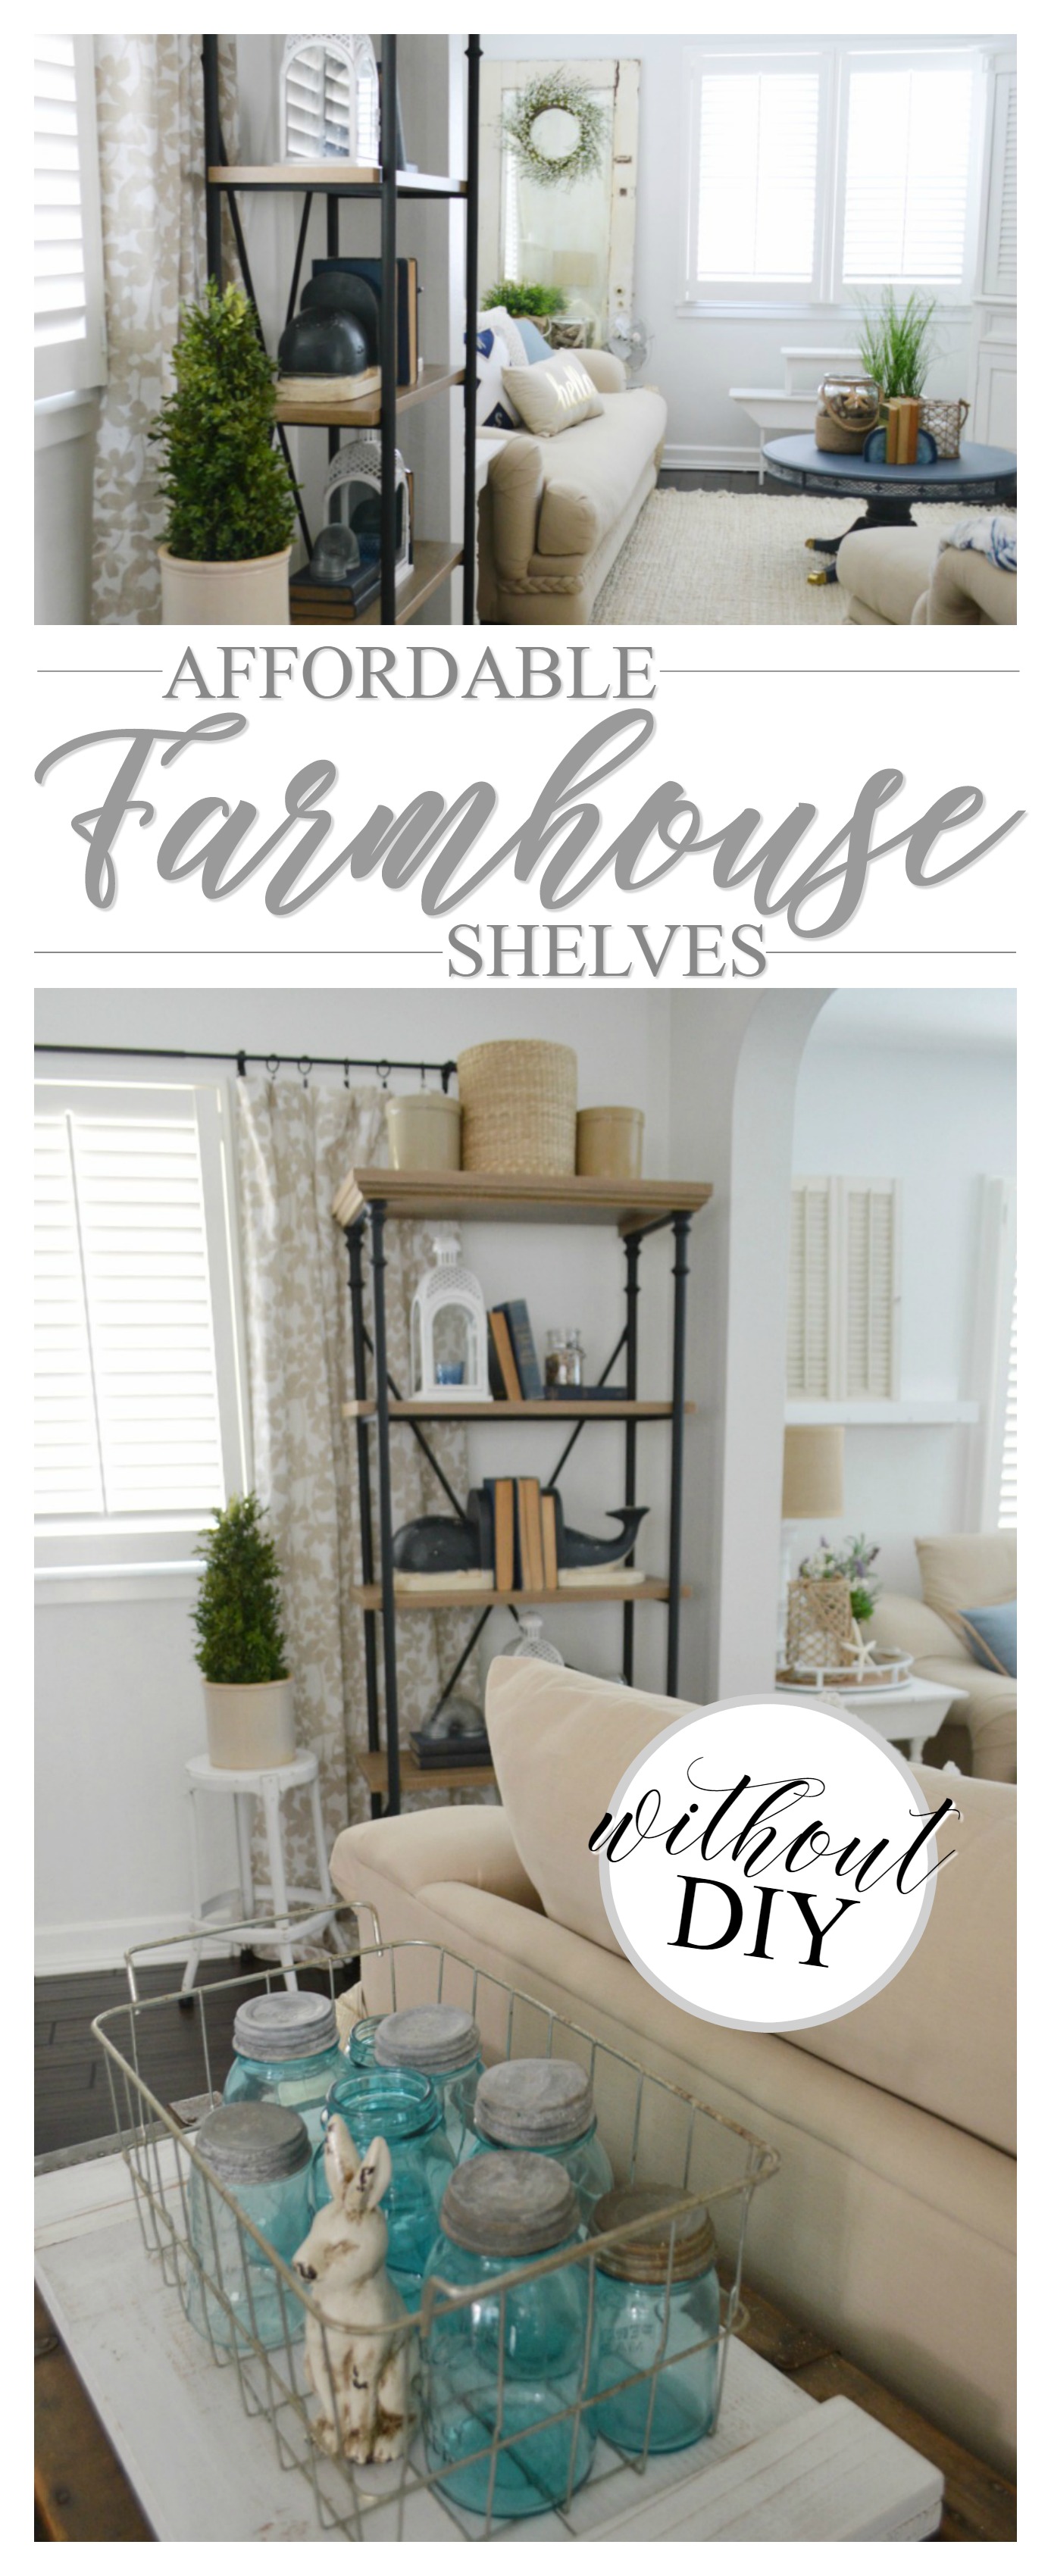 DIY free Farmhouse Shelves that are Affordable! I'm so thirlled with the quality and home delivery of my new storage. #sponsored